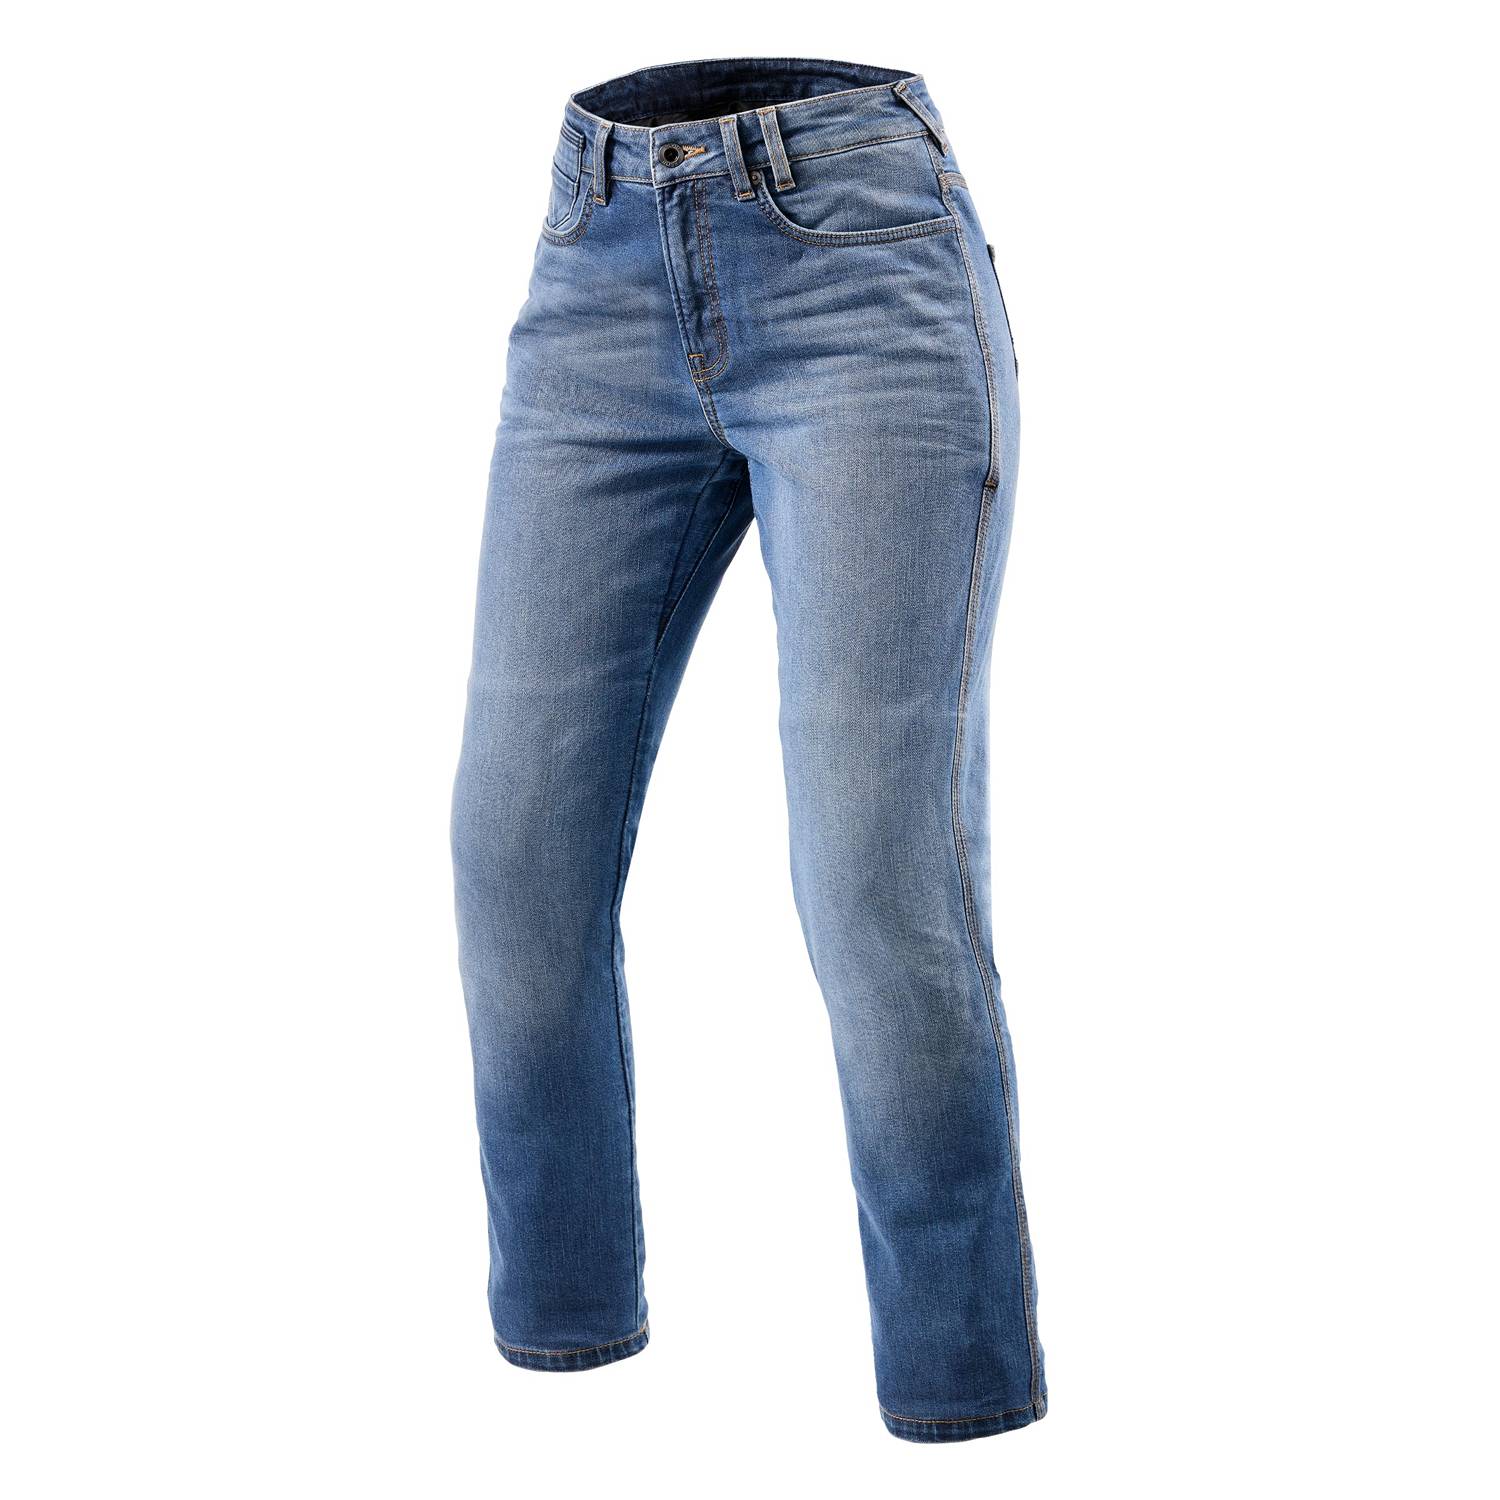 Image of REV'IT! Jeans Victoria 2 Ladies SF Classic Blue Used Motorcycle Jeans Größe L32/W29